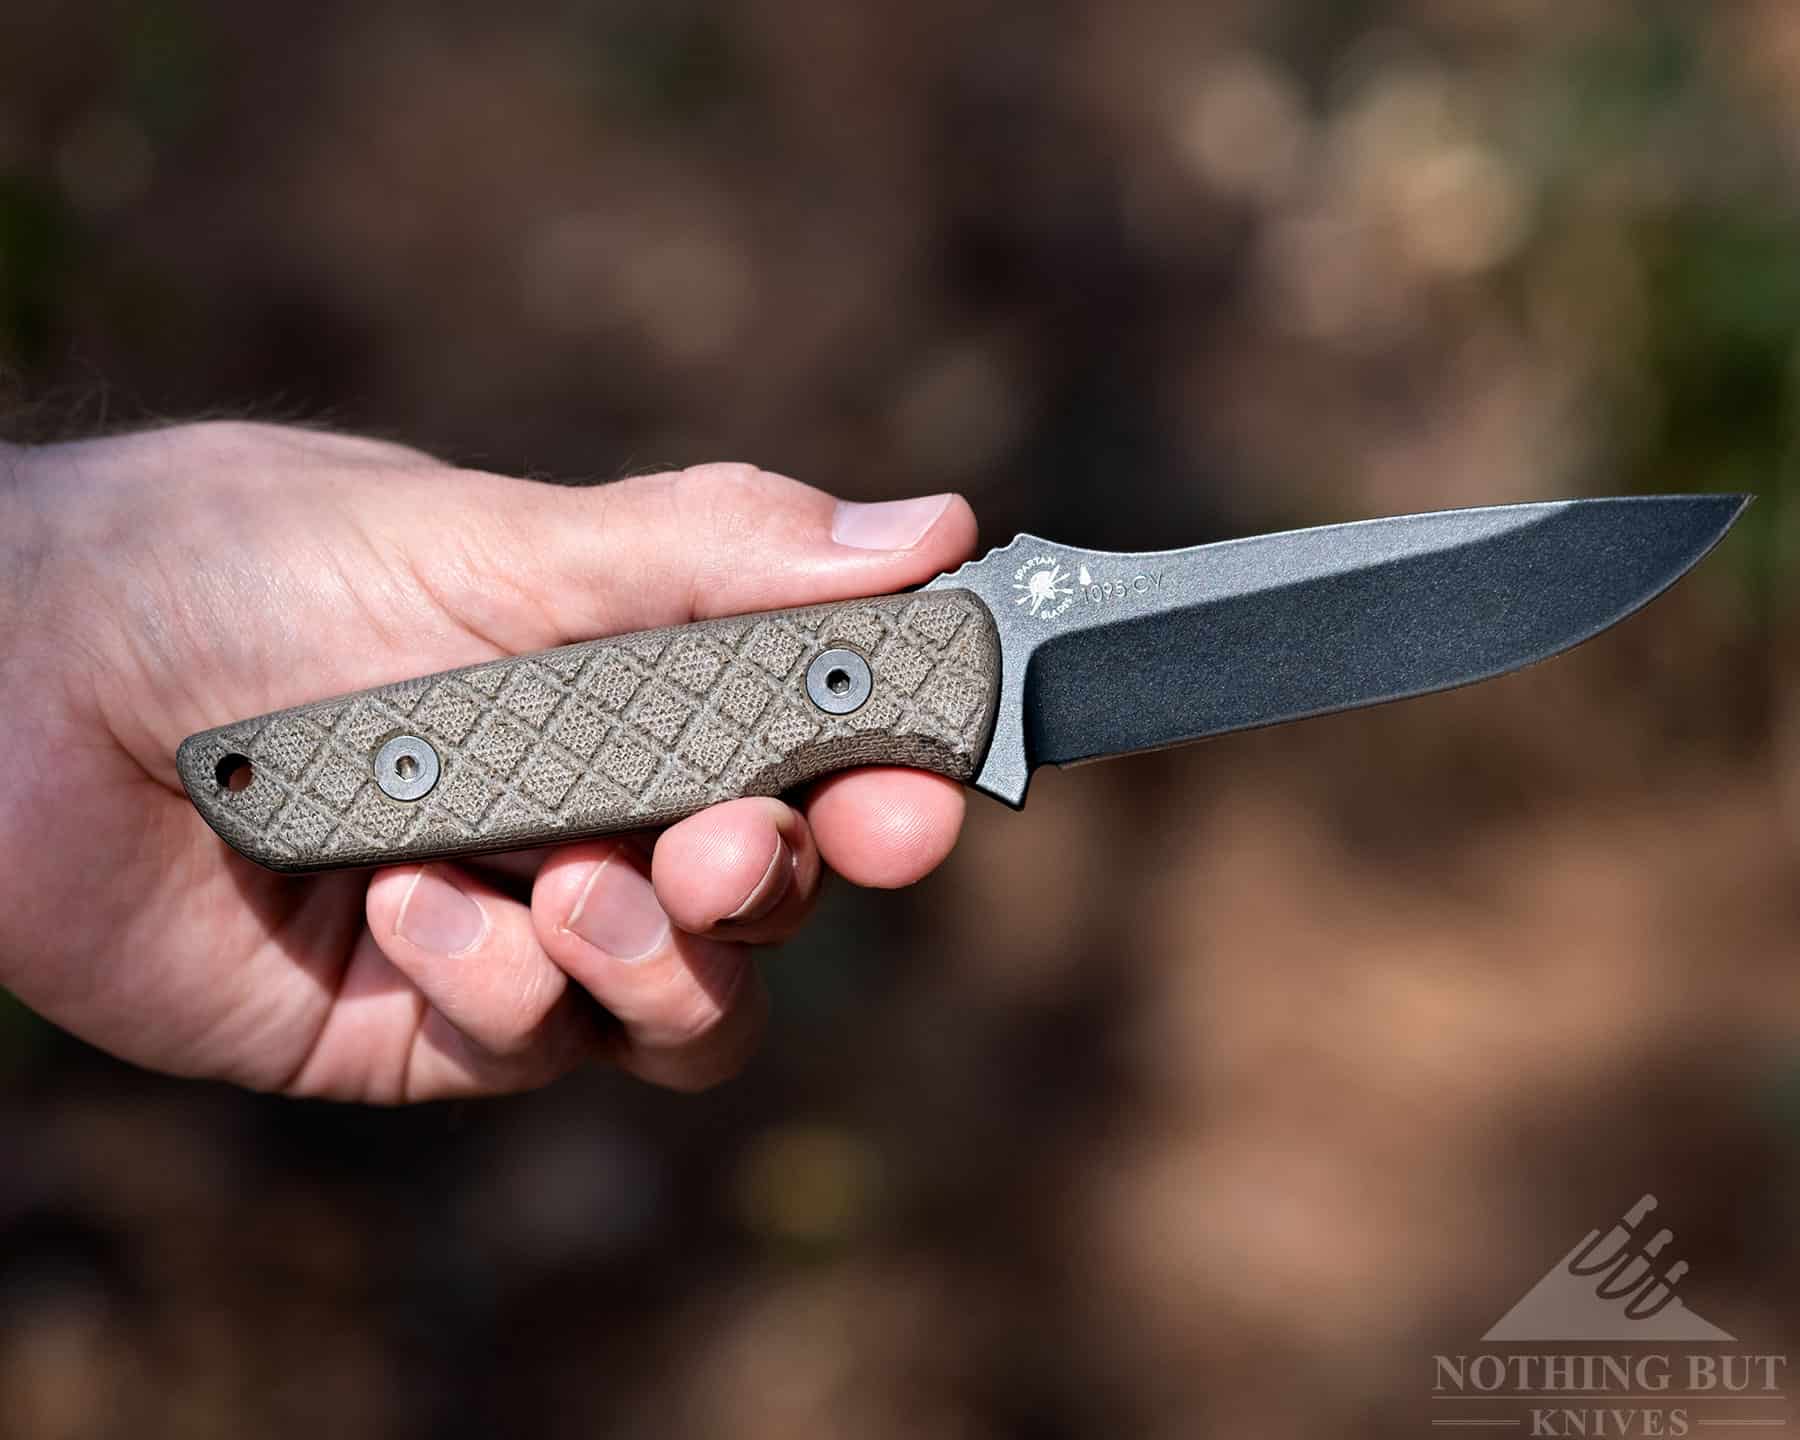 The slim textured Micarta handle of the Alala is easy to grip. 